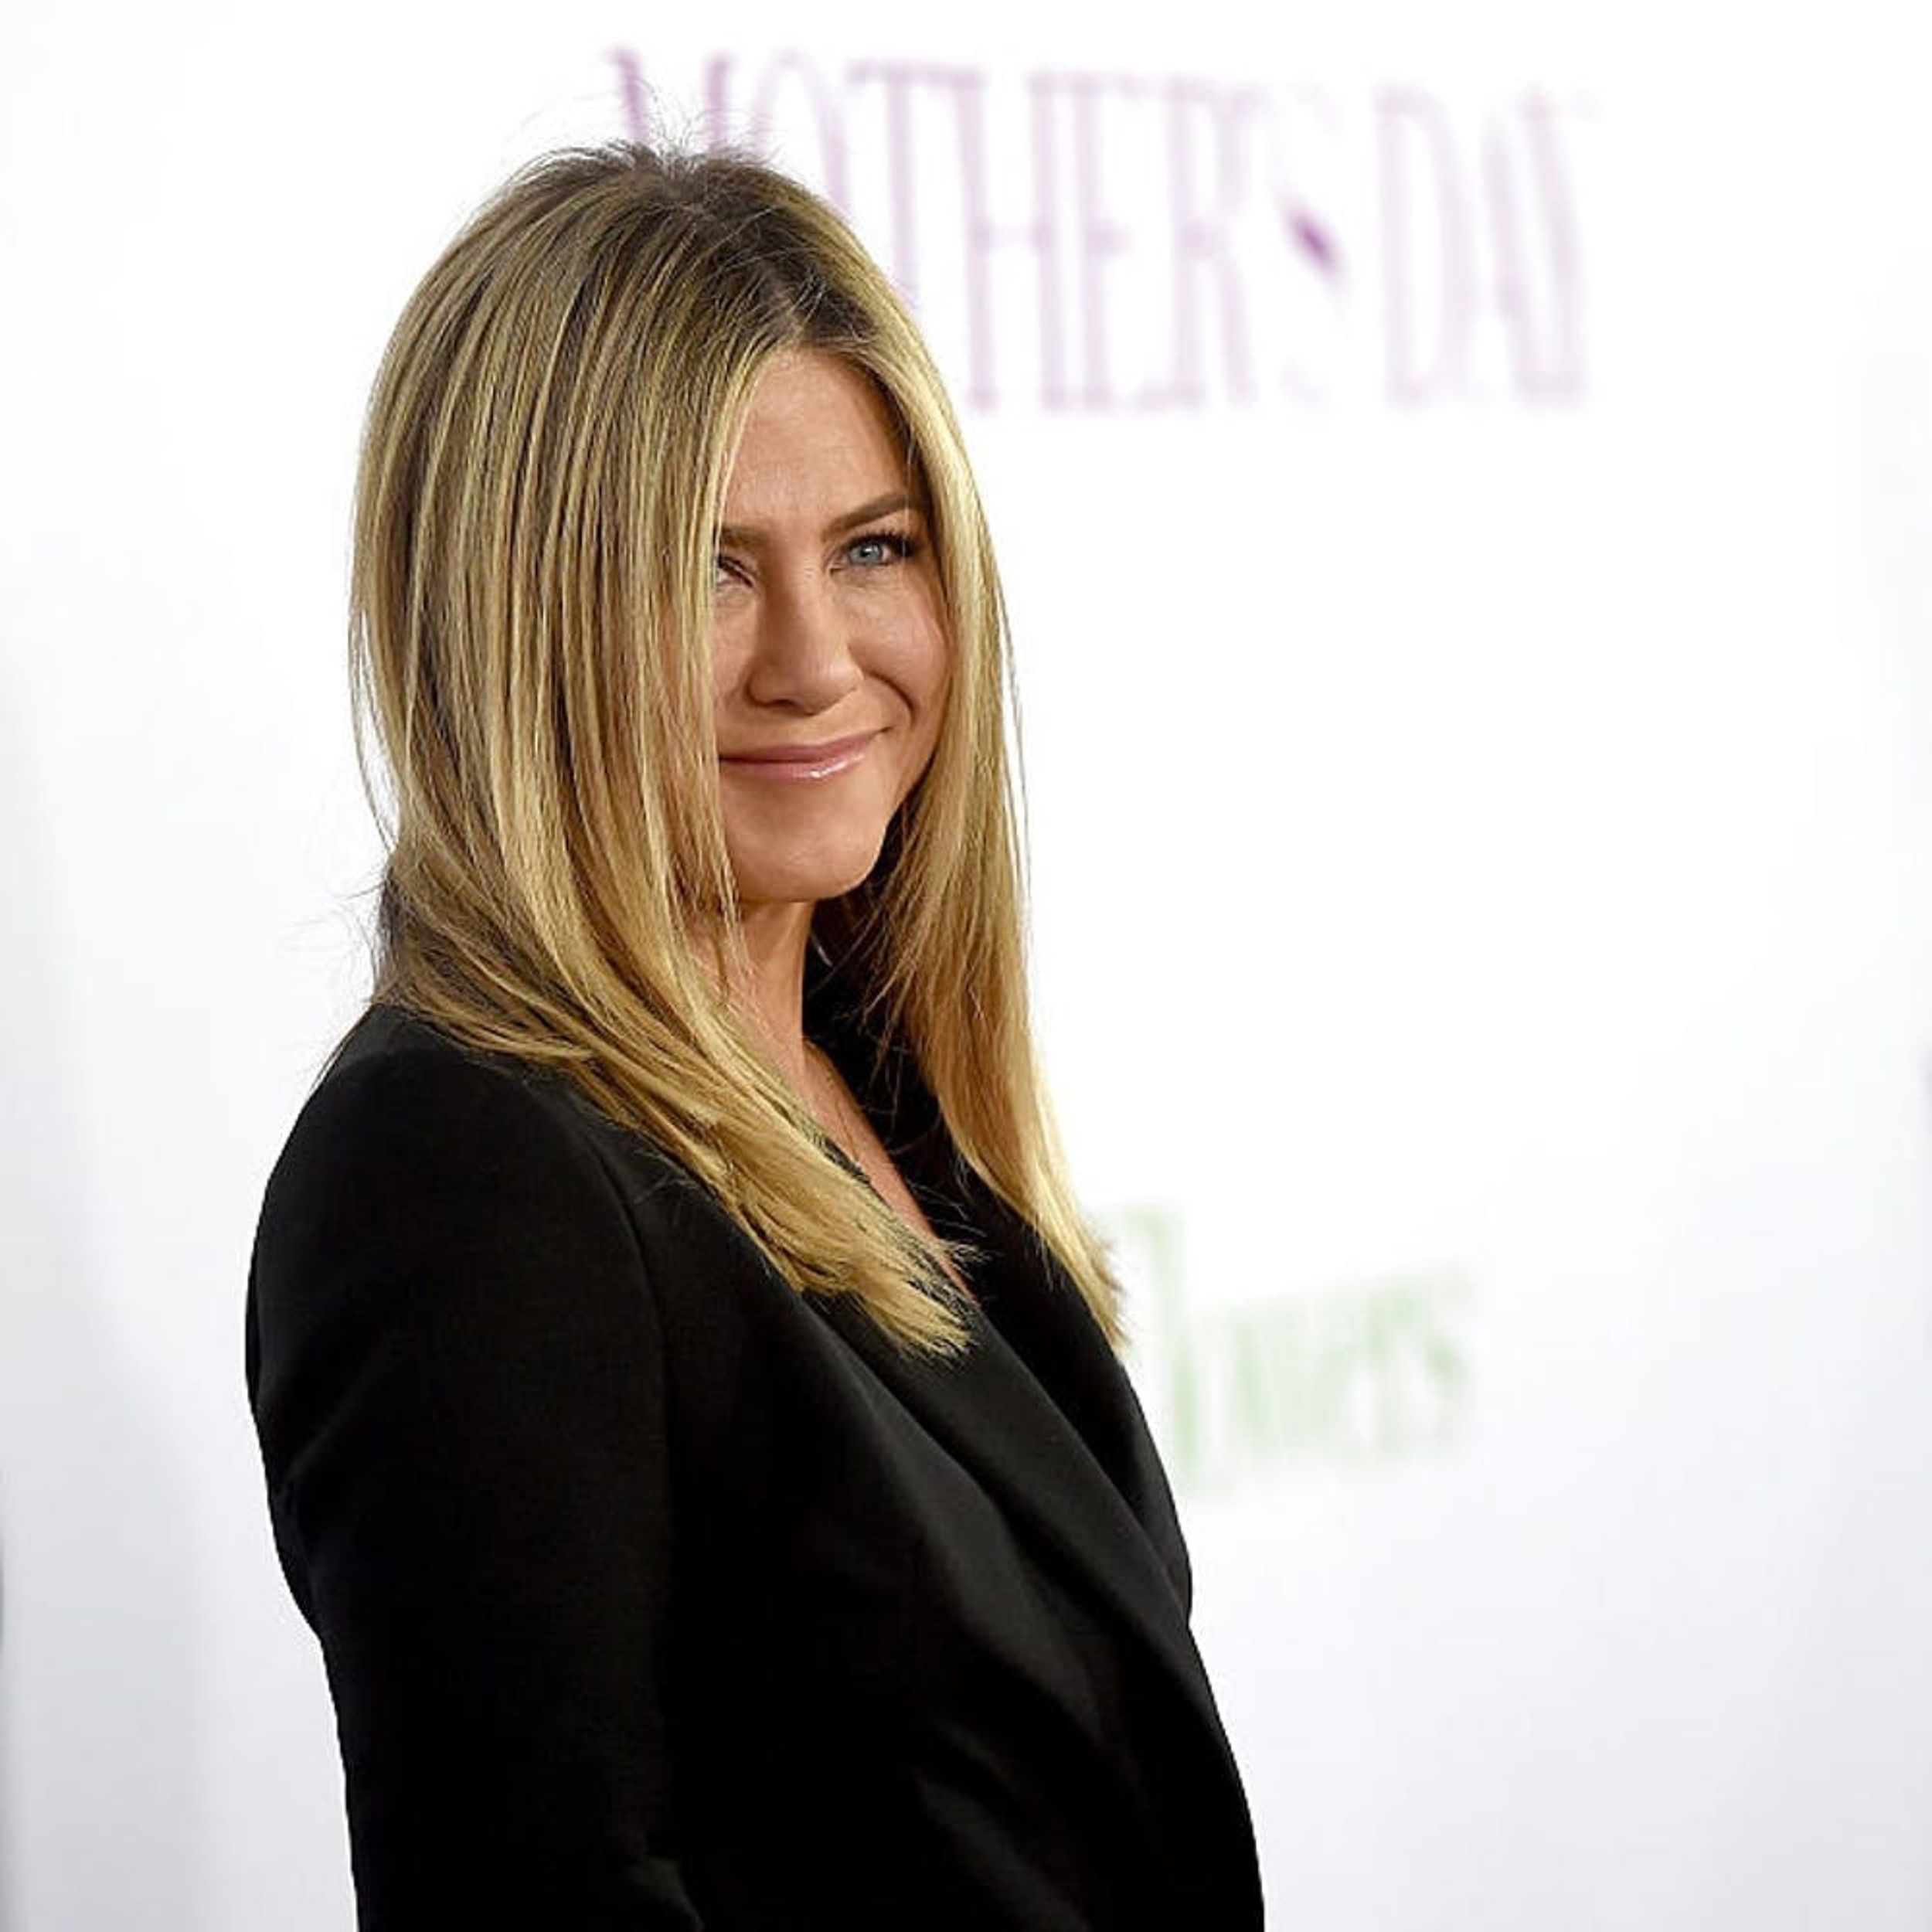 The Real Reason You’ll Probably Never See the Olsens or Jen Aniston on Instagram